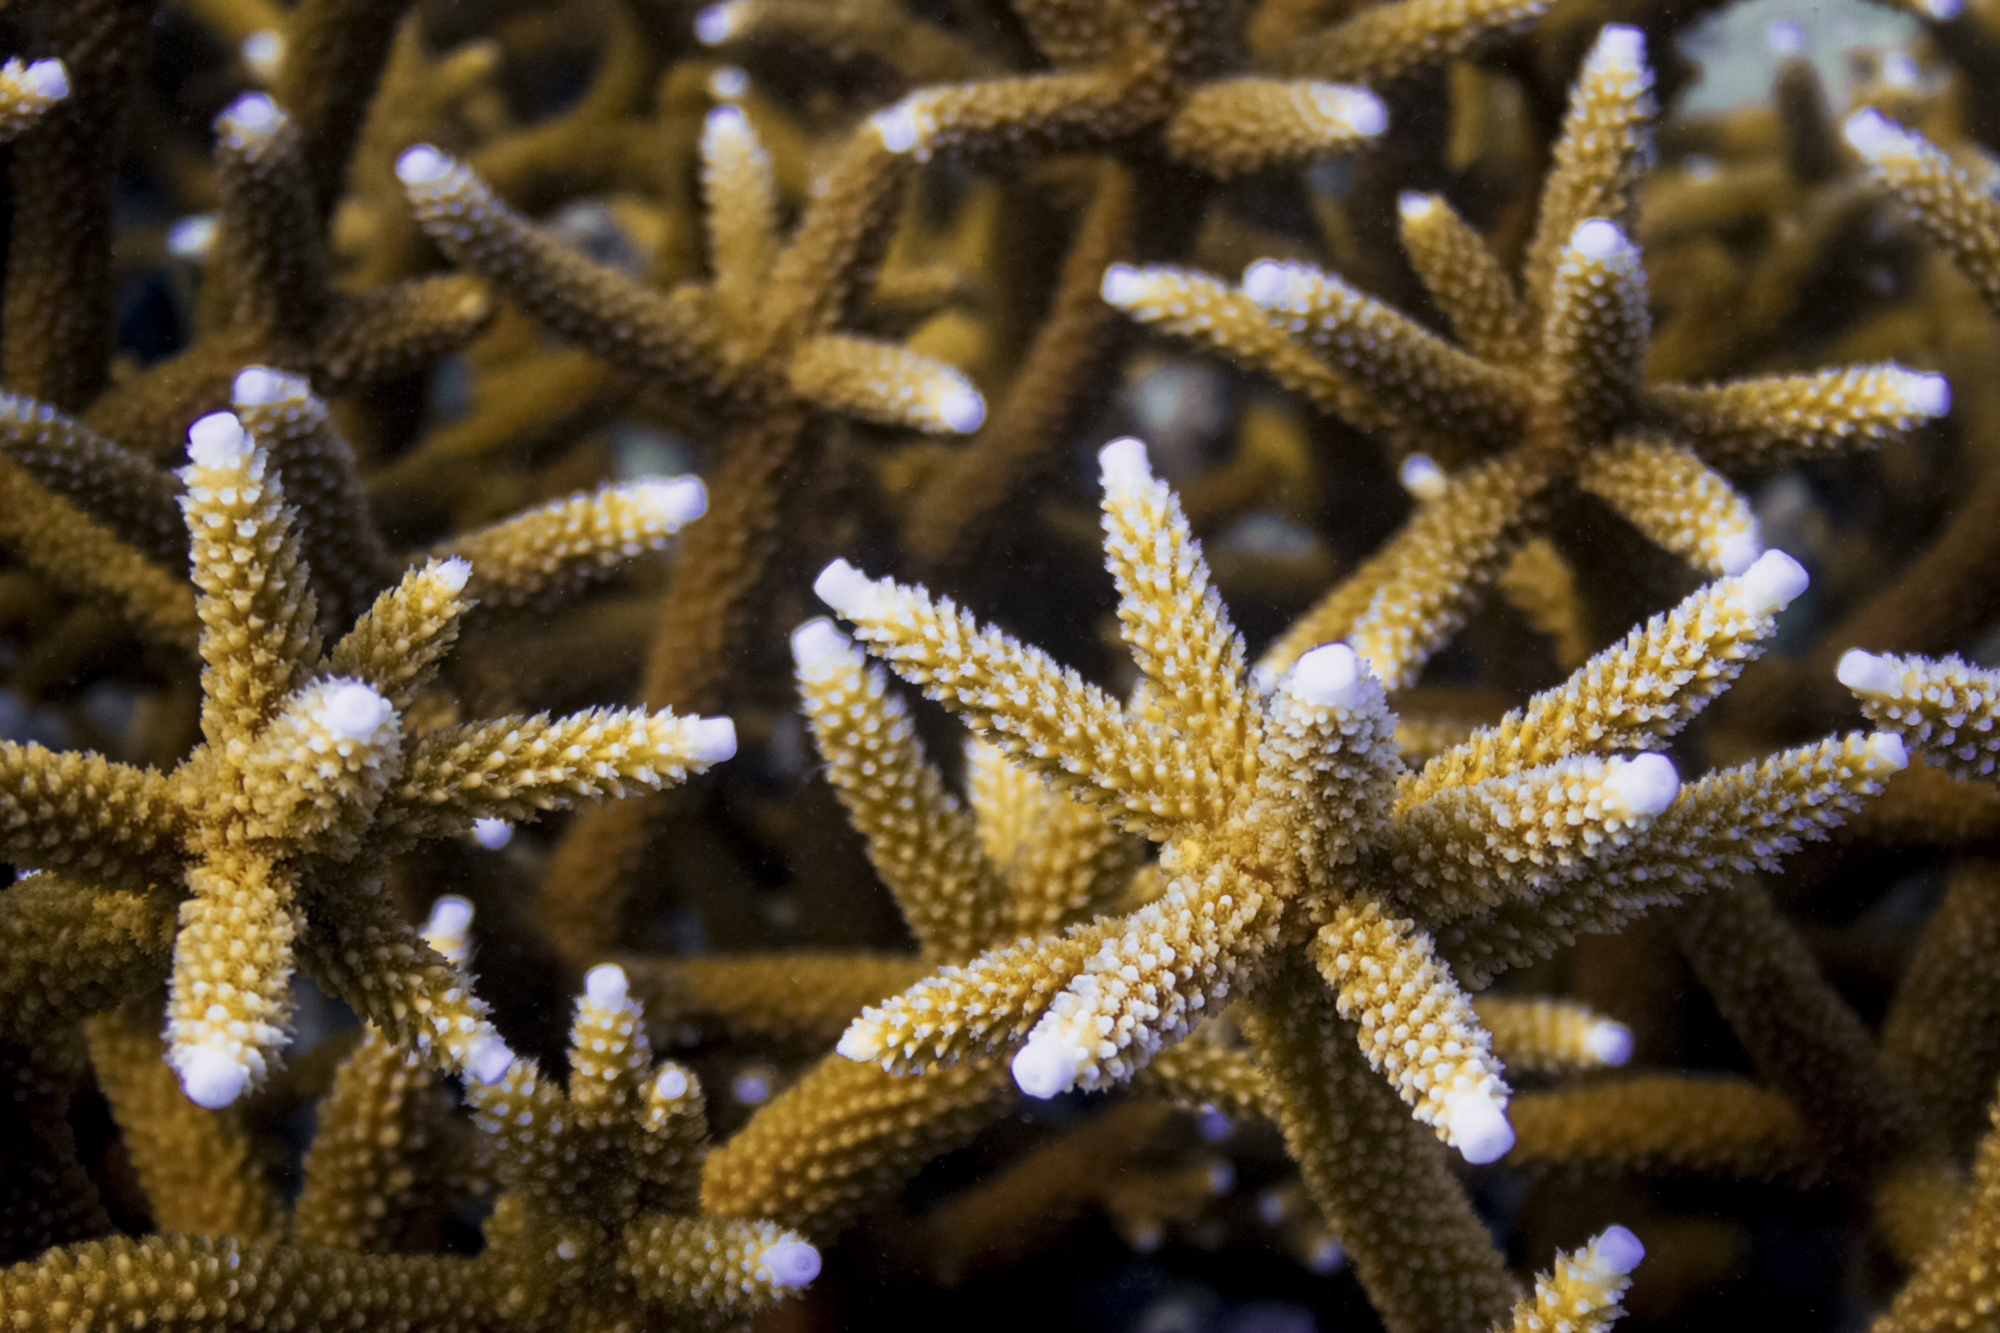 Multimedia Gallery - Endangered staghorn coral (Acropora